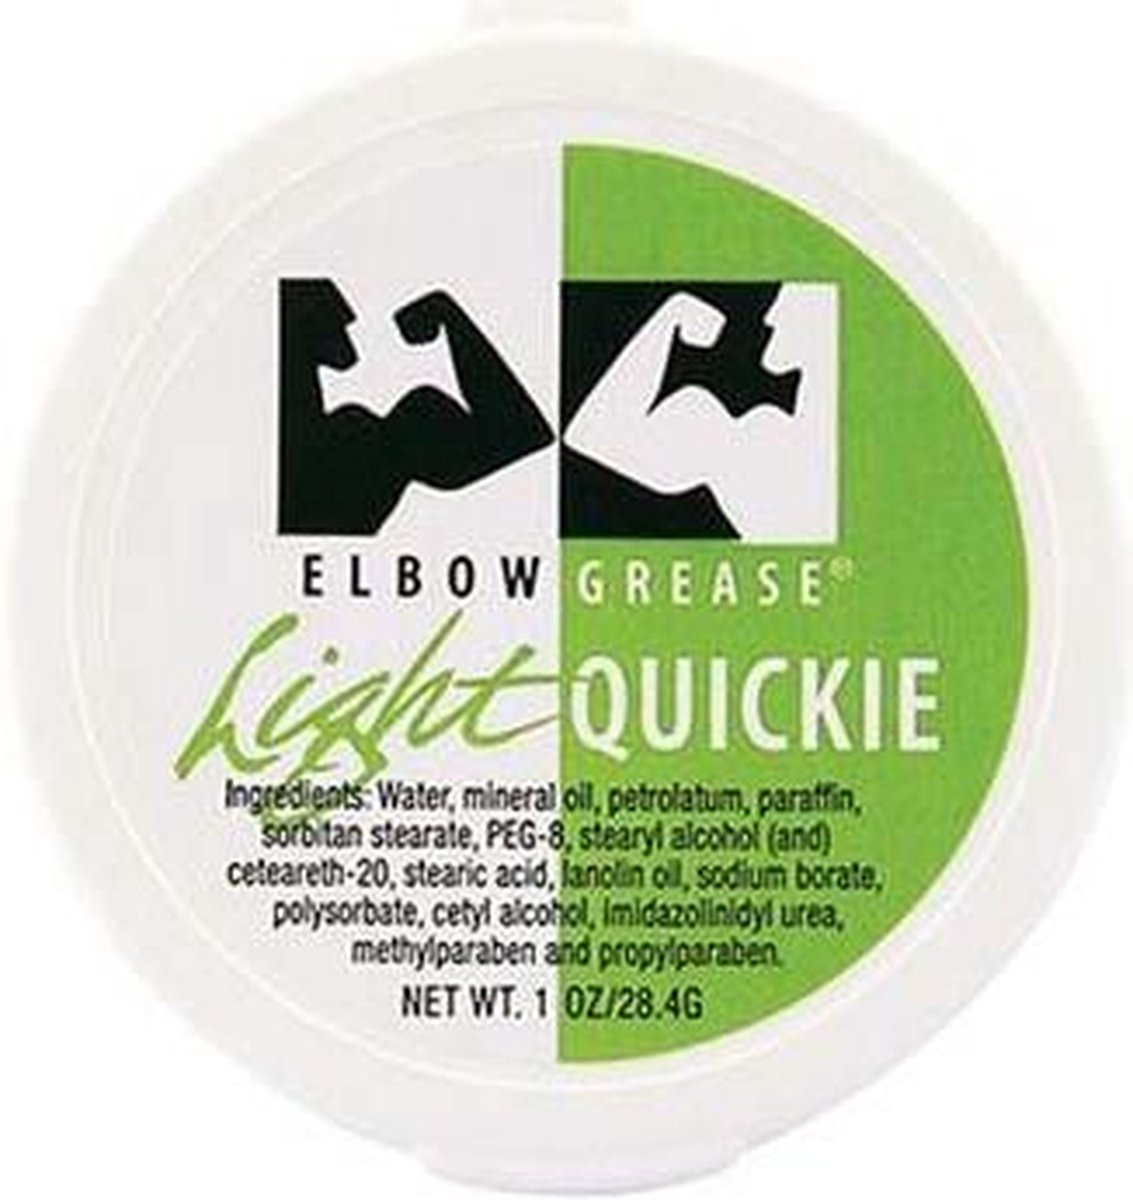 Elbow grease light quickie 30 ml